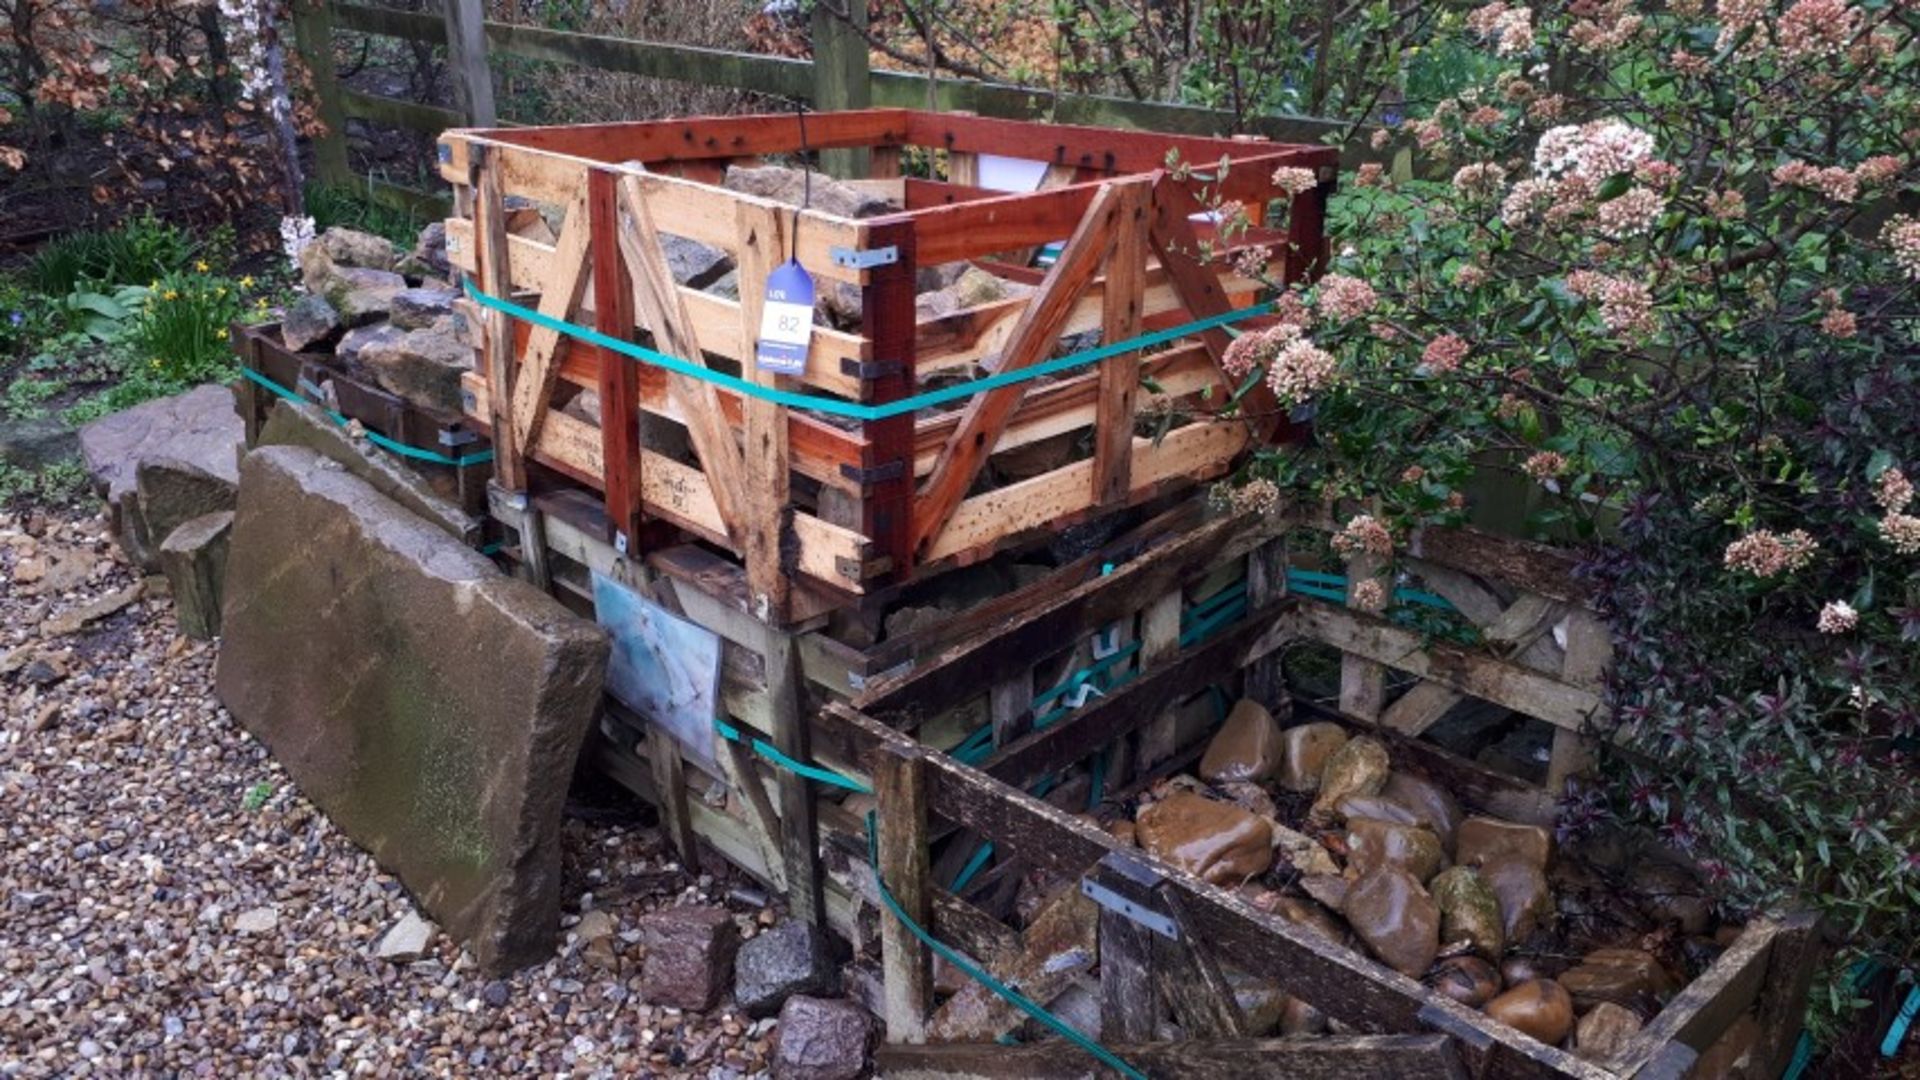 Assortment of Bullwell sandstone to 4 x crates *Please note, there are no loading facilities on